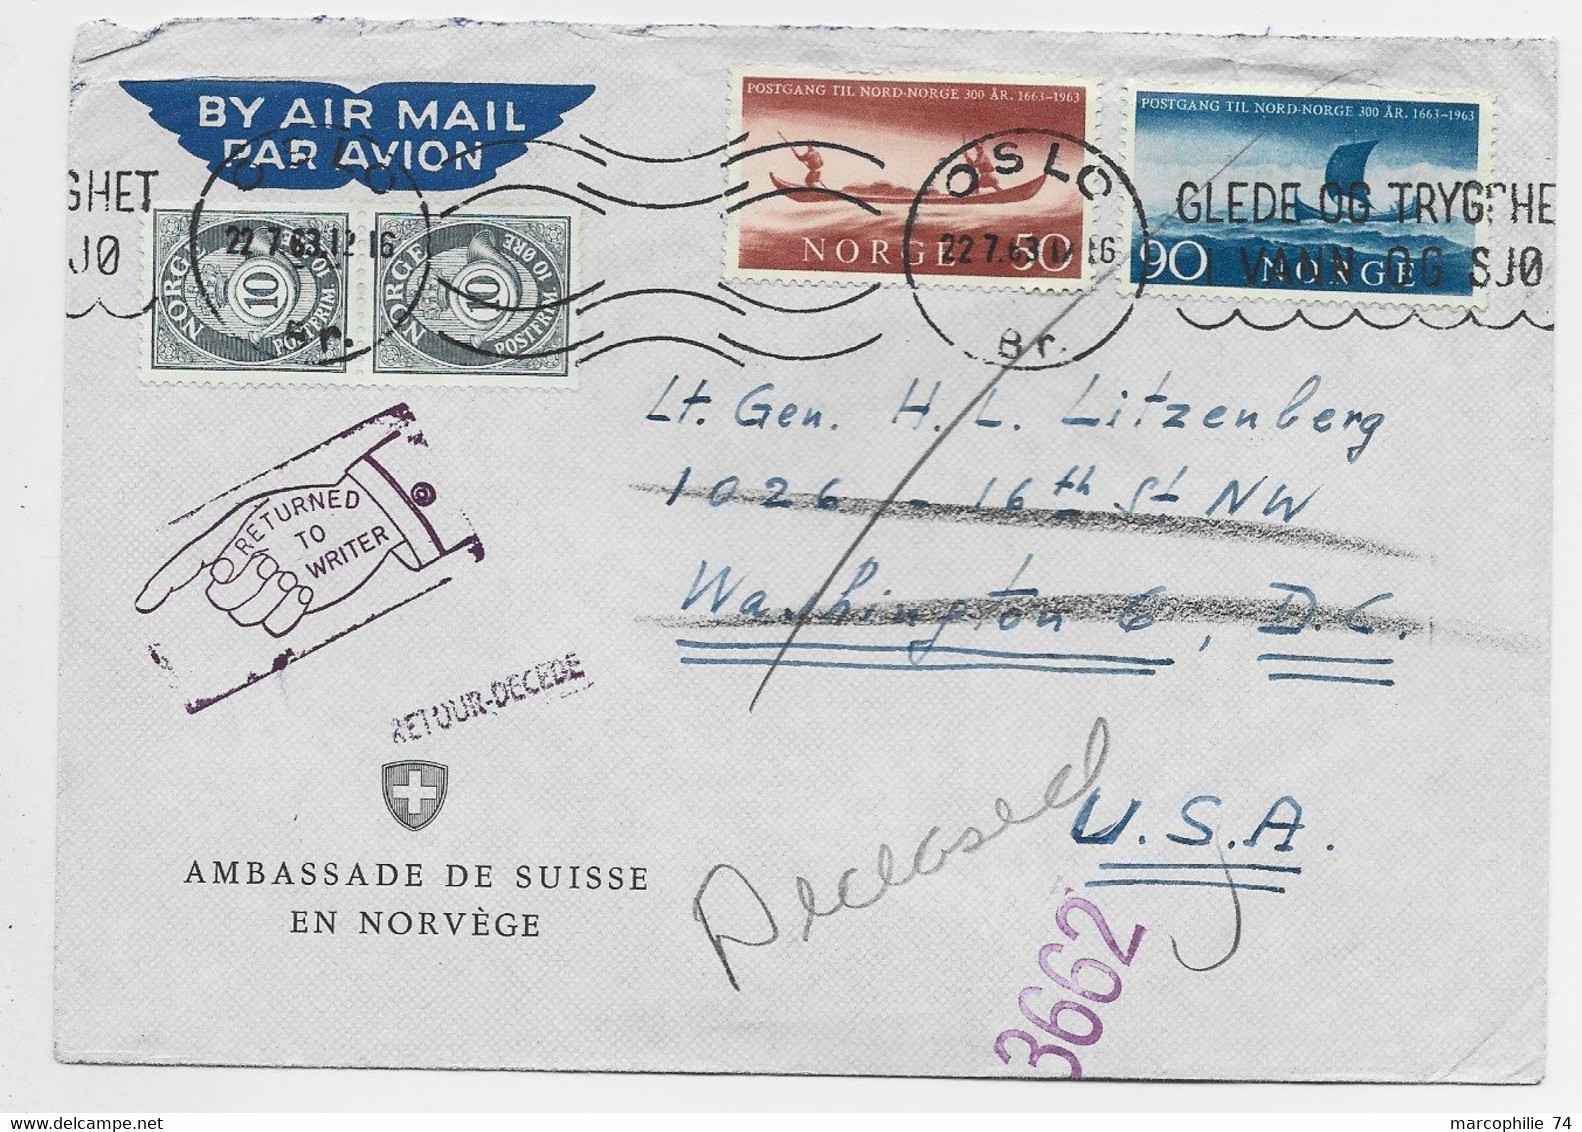 NORGE NORWAY 90 ORE+ 50 ORE + 10 OREPAIRE LETTRE COVER AMBASSADE SUISSE AIR  MAIL OSLO 22.7.1963 TO USA + RETOUR DECEDE - Lettres & Documents